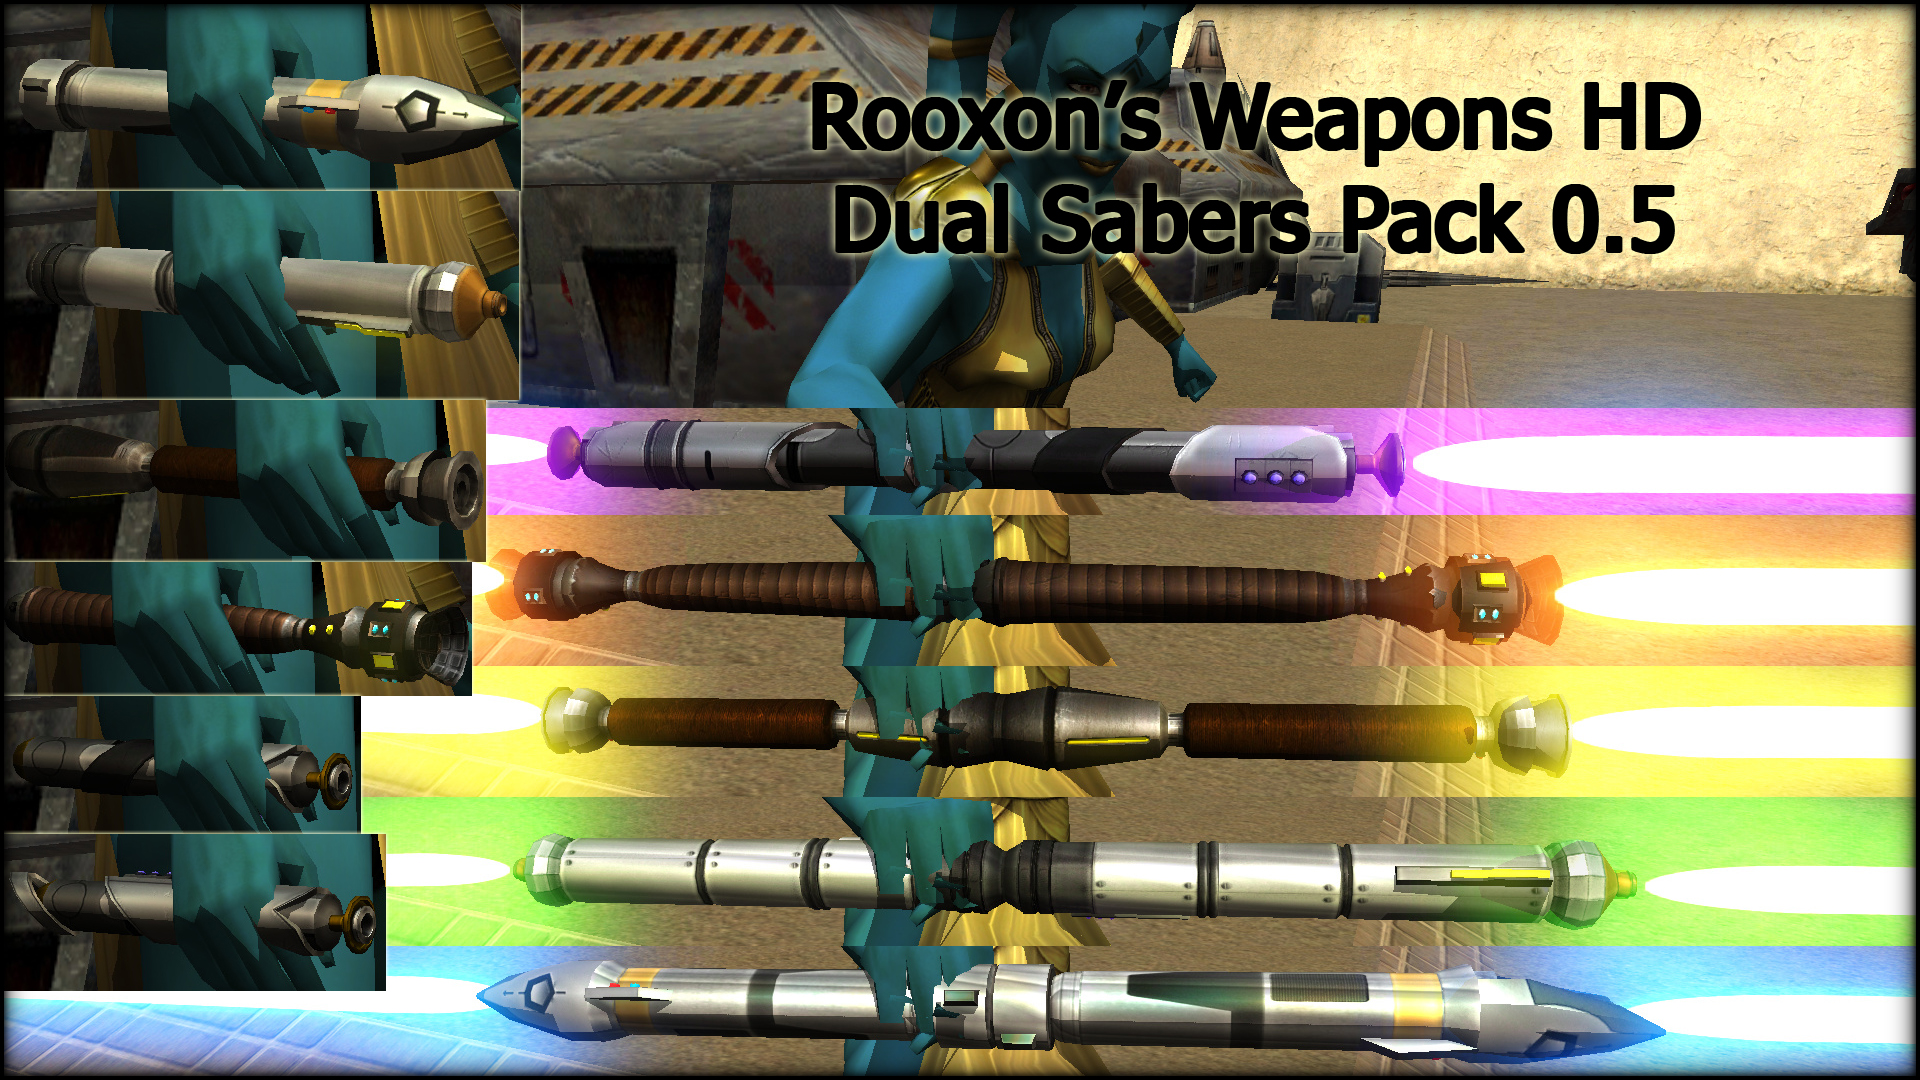 More information about "Dual Sabers Pack - Rooxon's WeaponsHD"